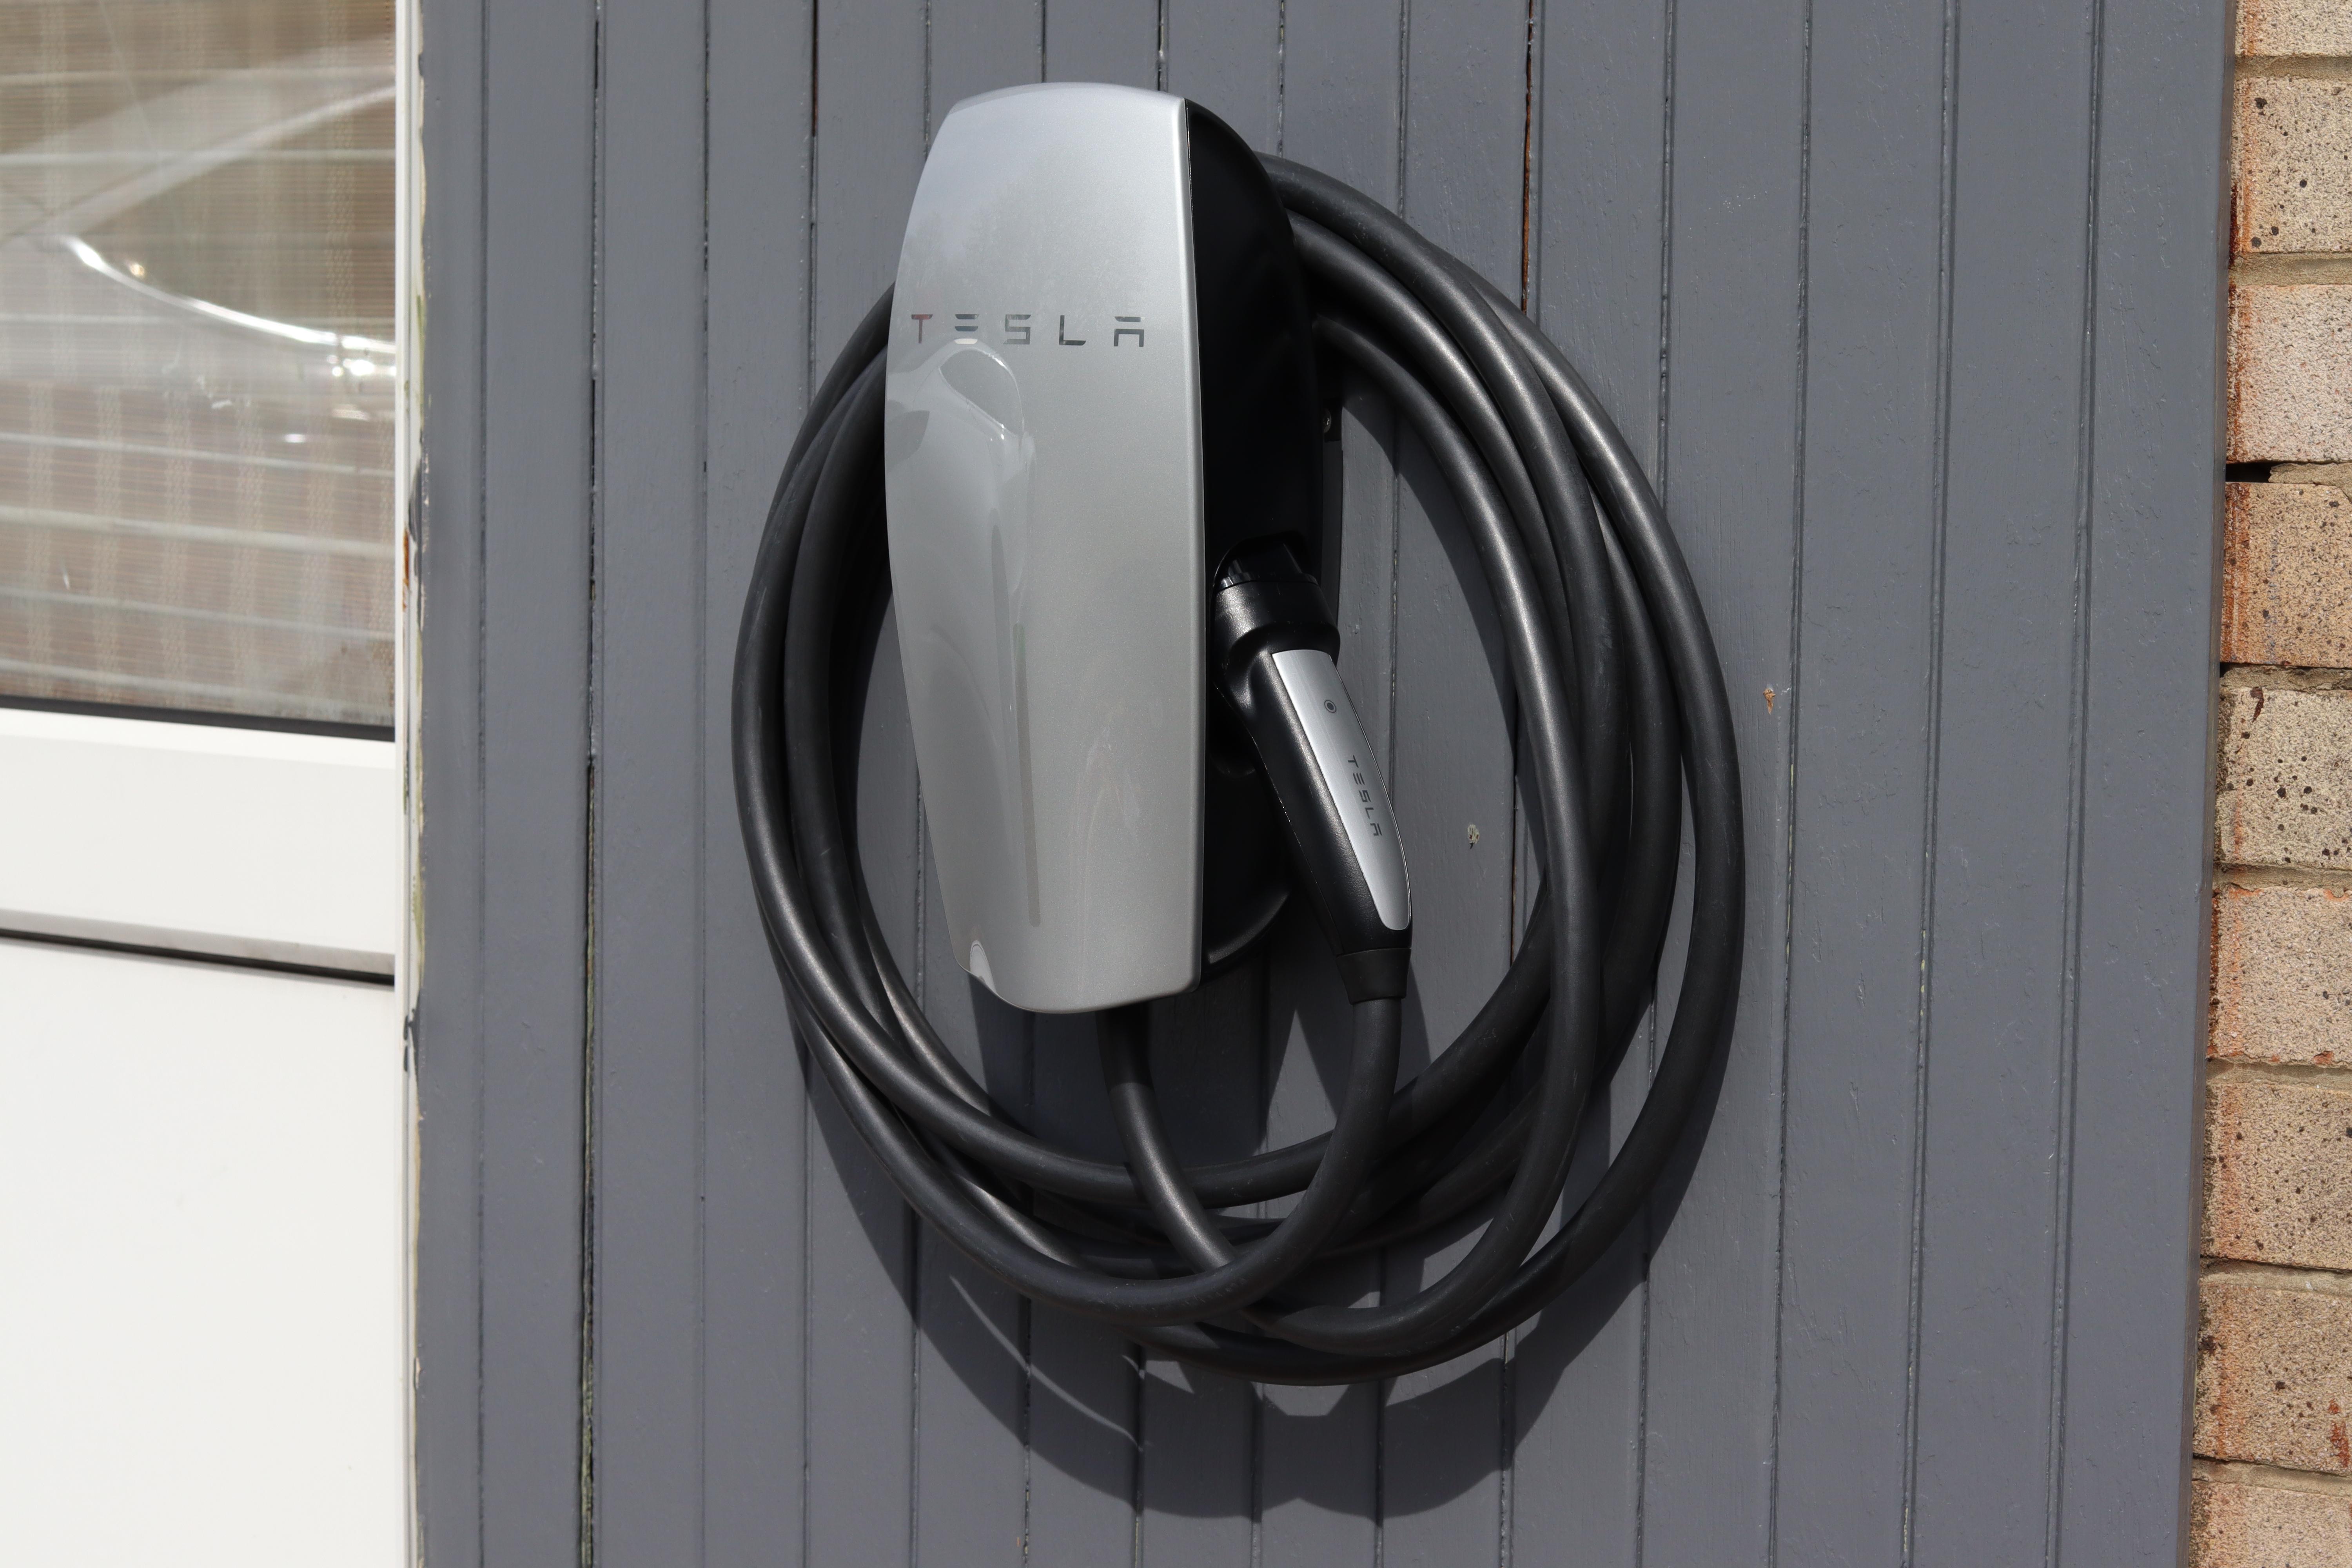 tesla-home-charger-stock-photos-free-royalty-free-stock-photos-from-dreamstime-atelier-yuwa